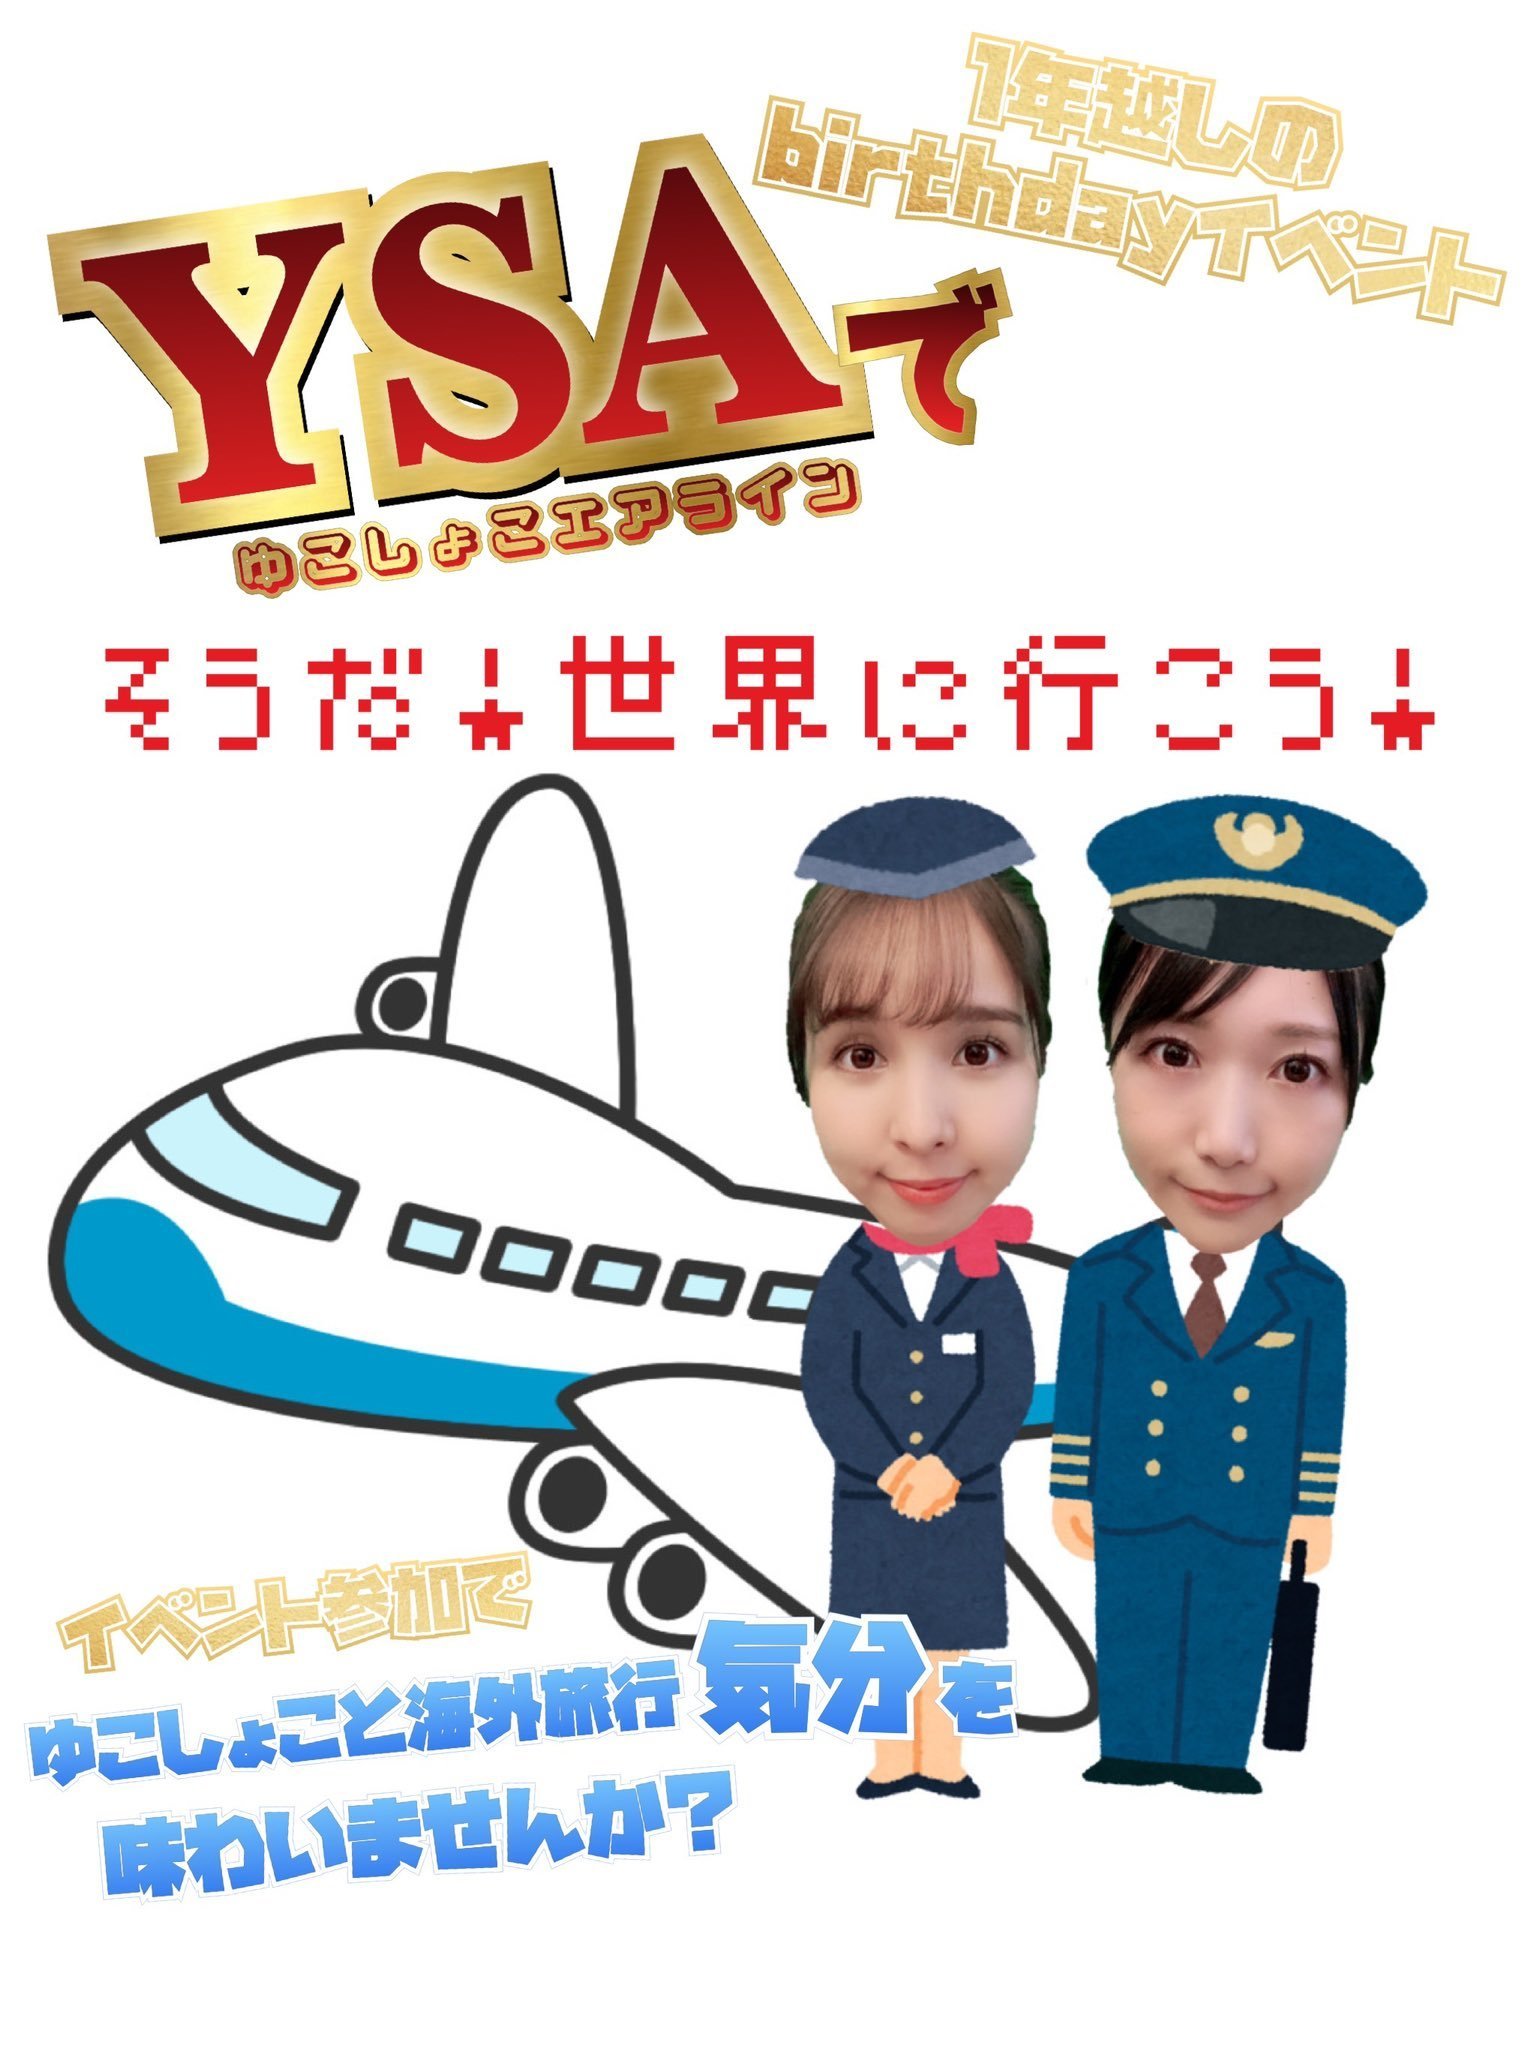 ys-airline